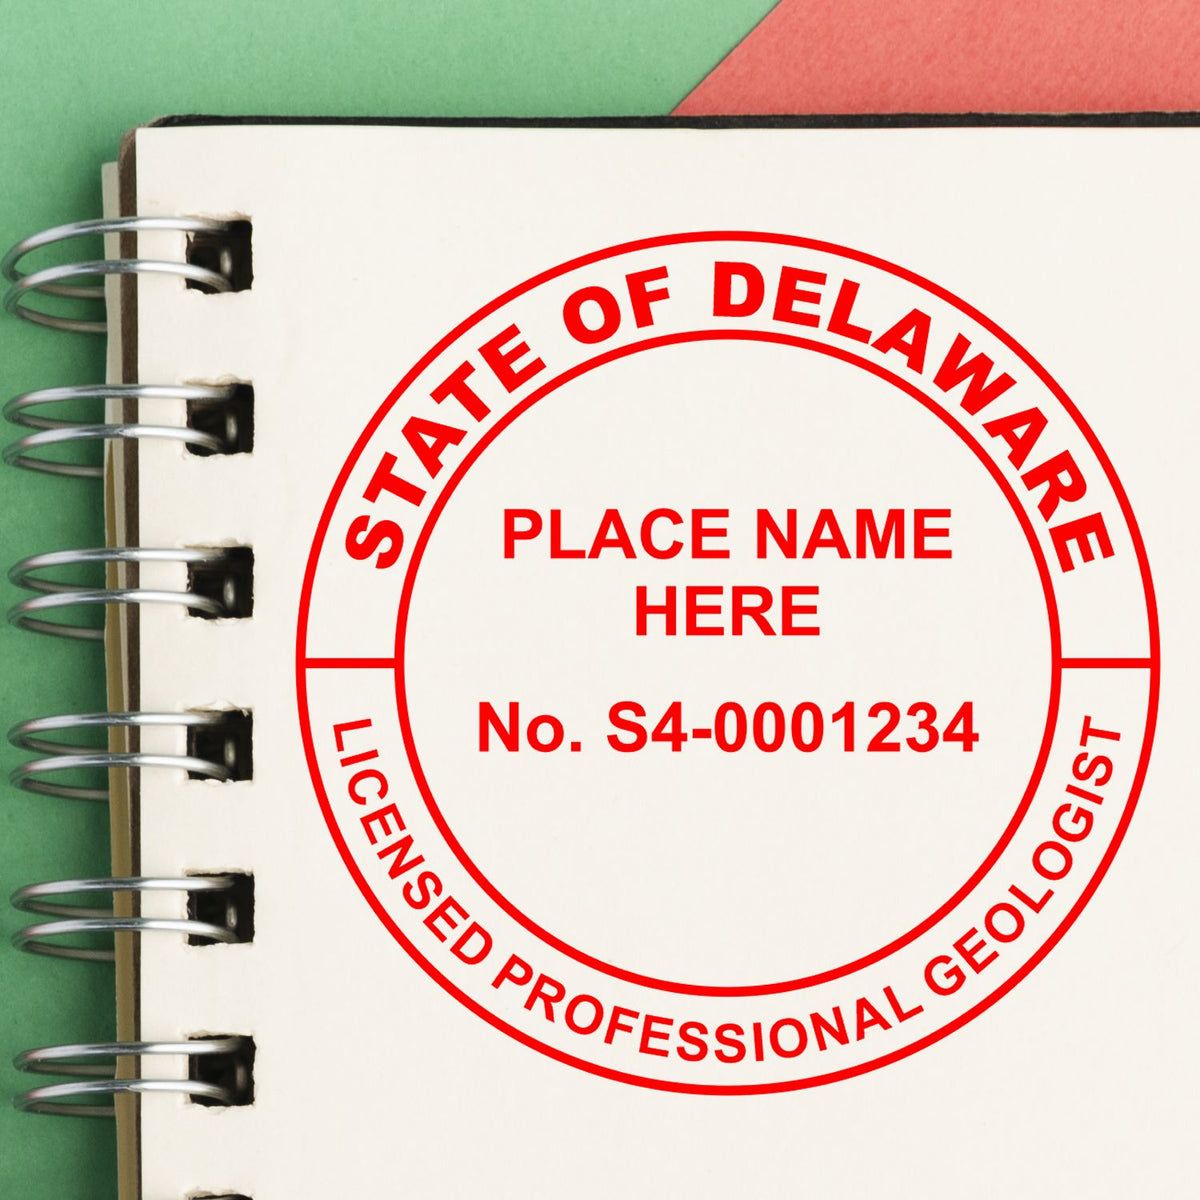 The Digital Delaware Geologist Stamp, Electronic Seal for Delaware Geologist stamp impression comes to life with a crisp, detailed image stamped on paper - showcasing true professional quality.